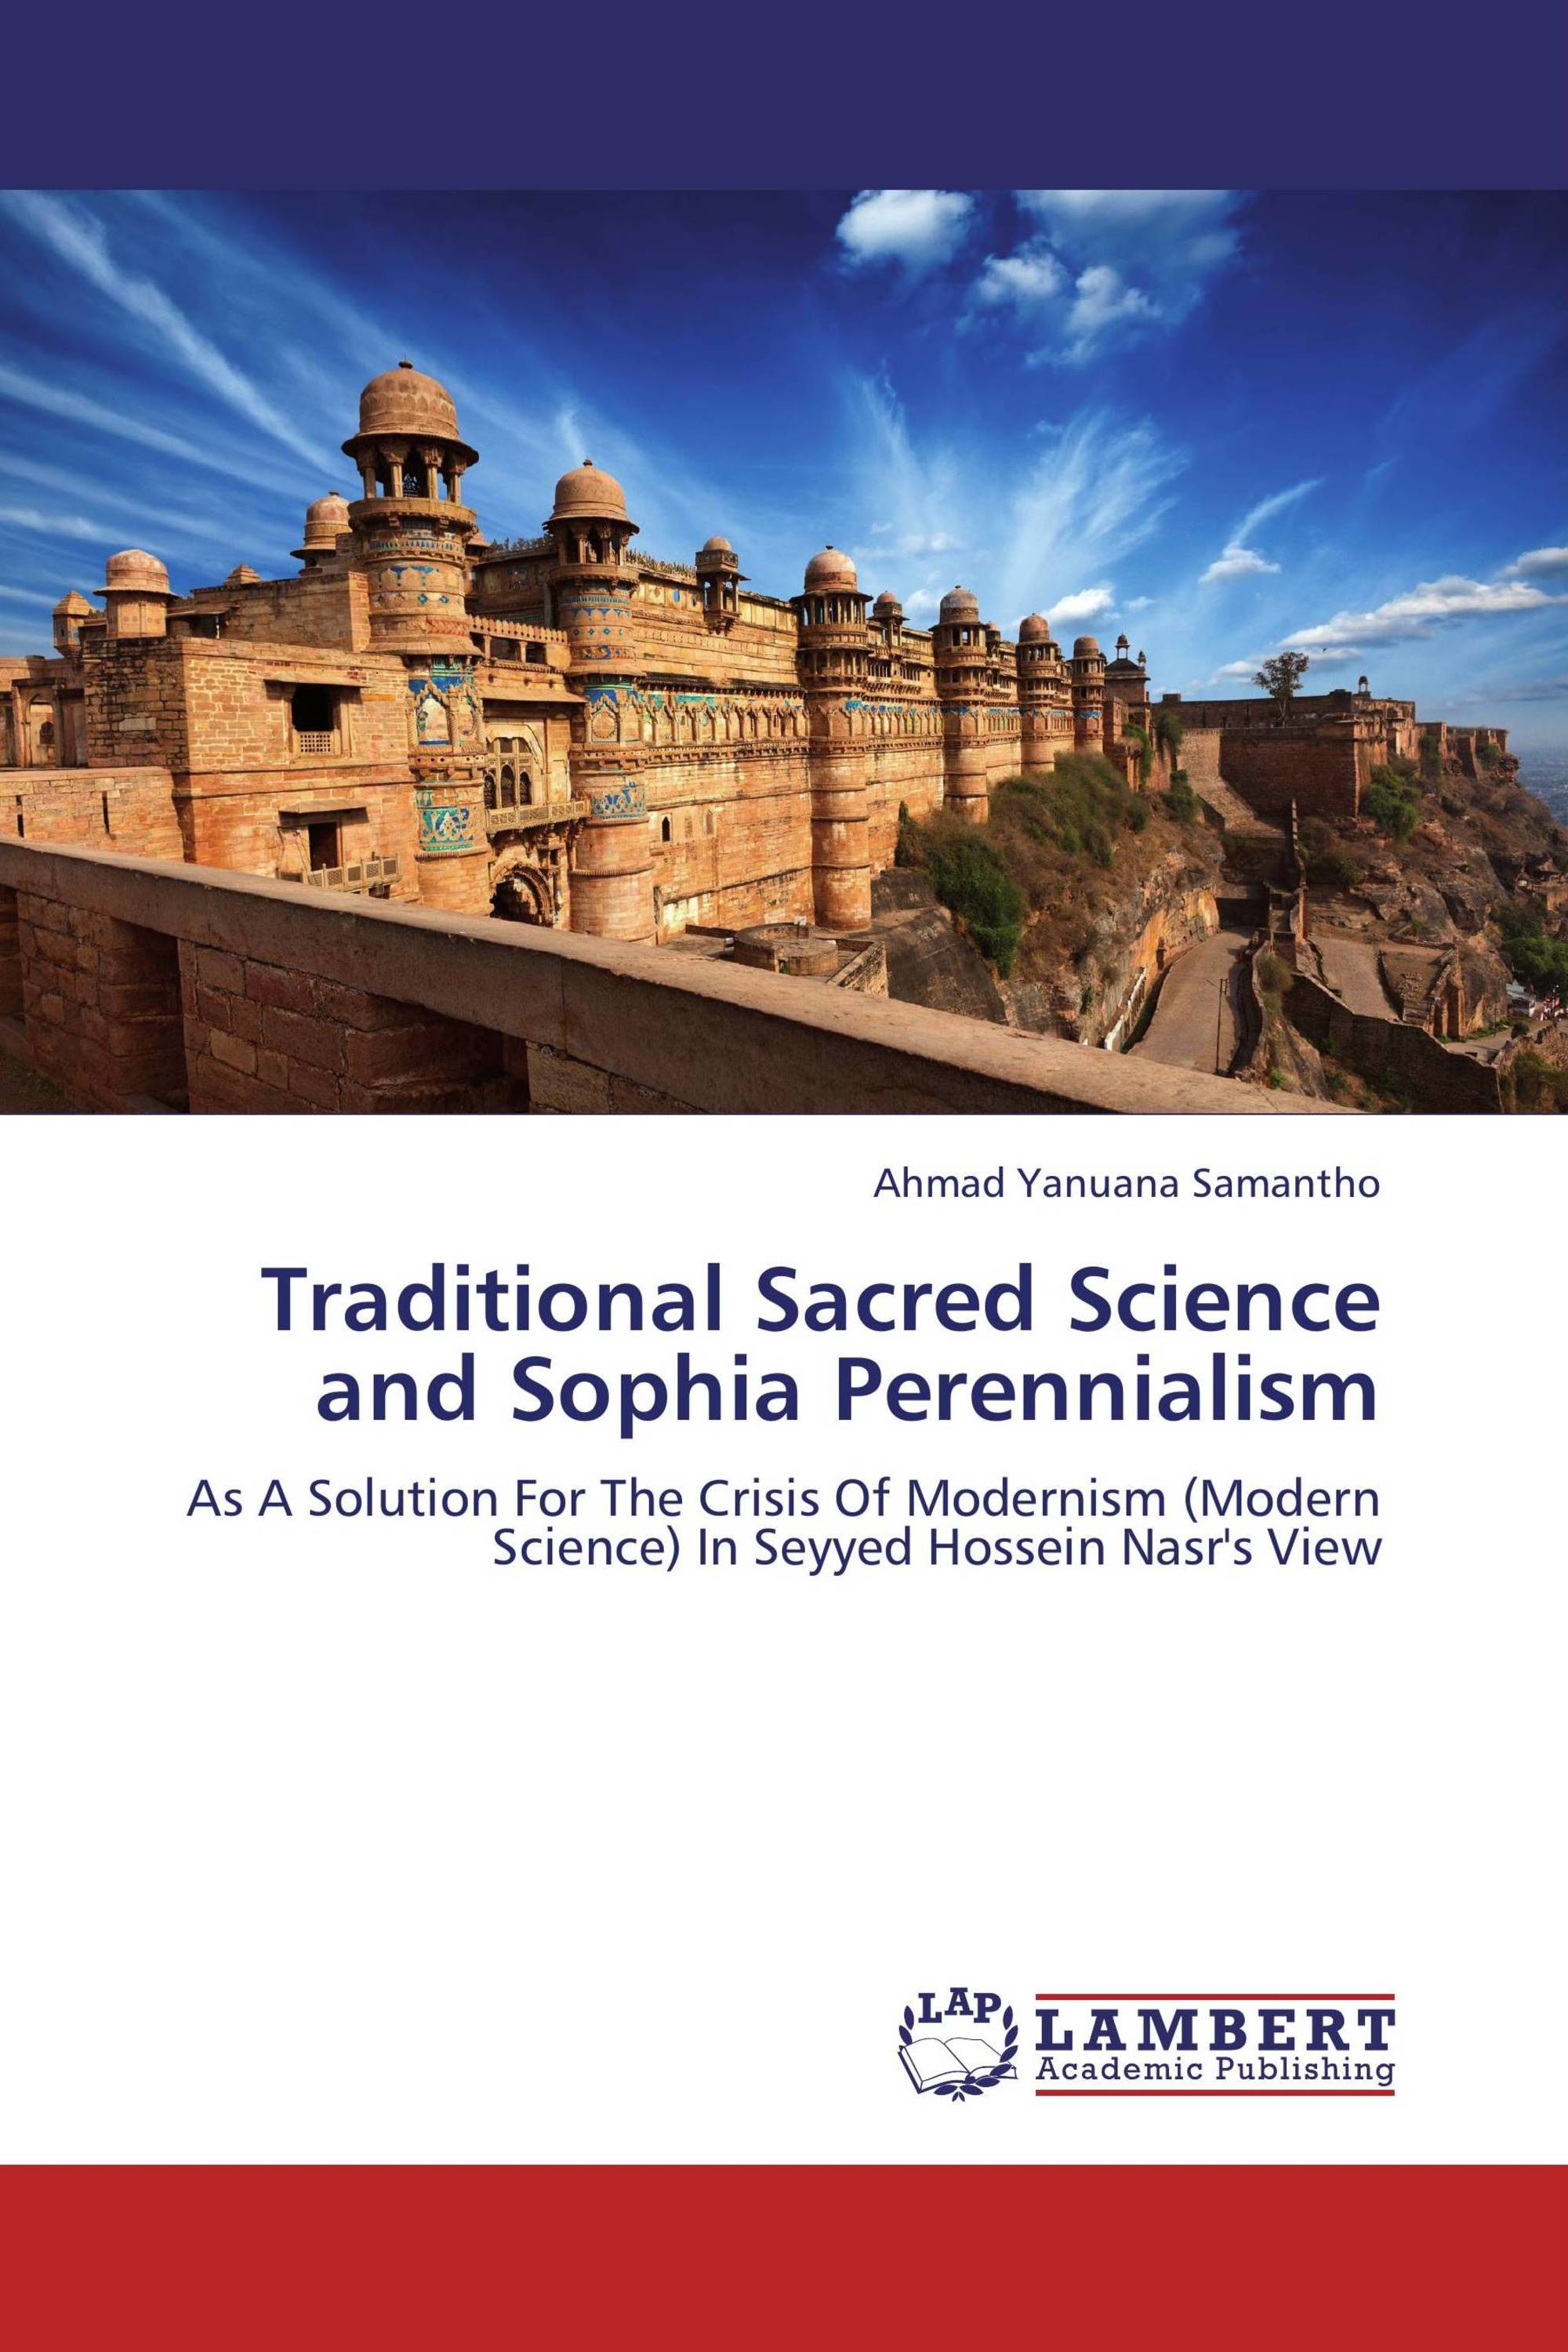 Traditional Sacred Science and Sophia Perennialism